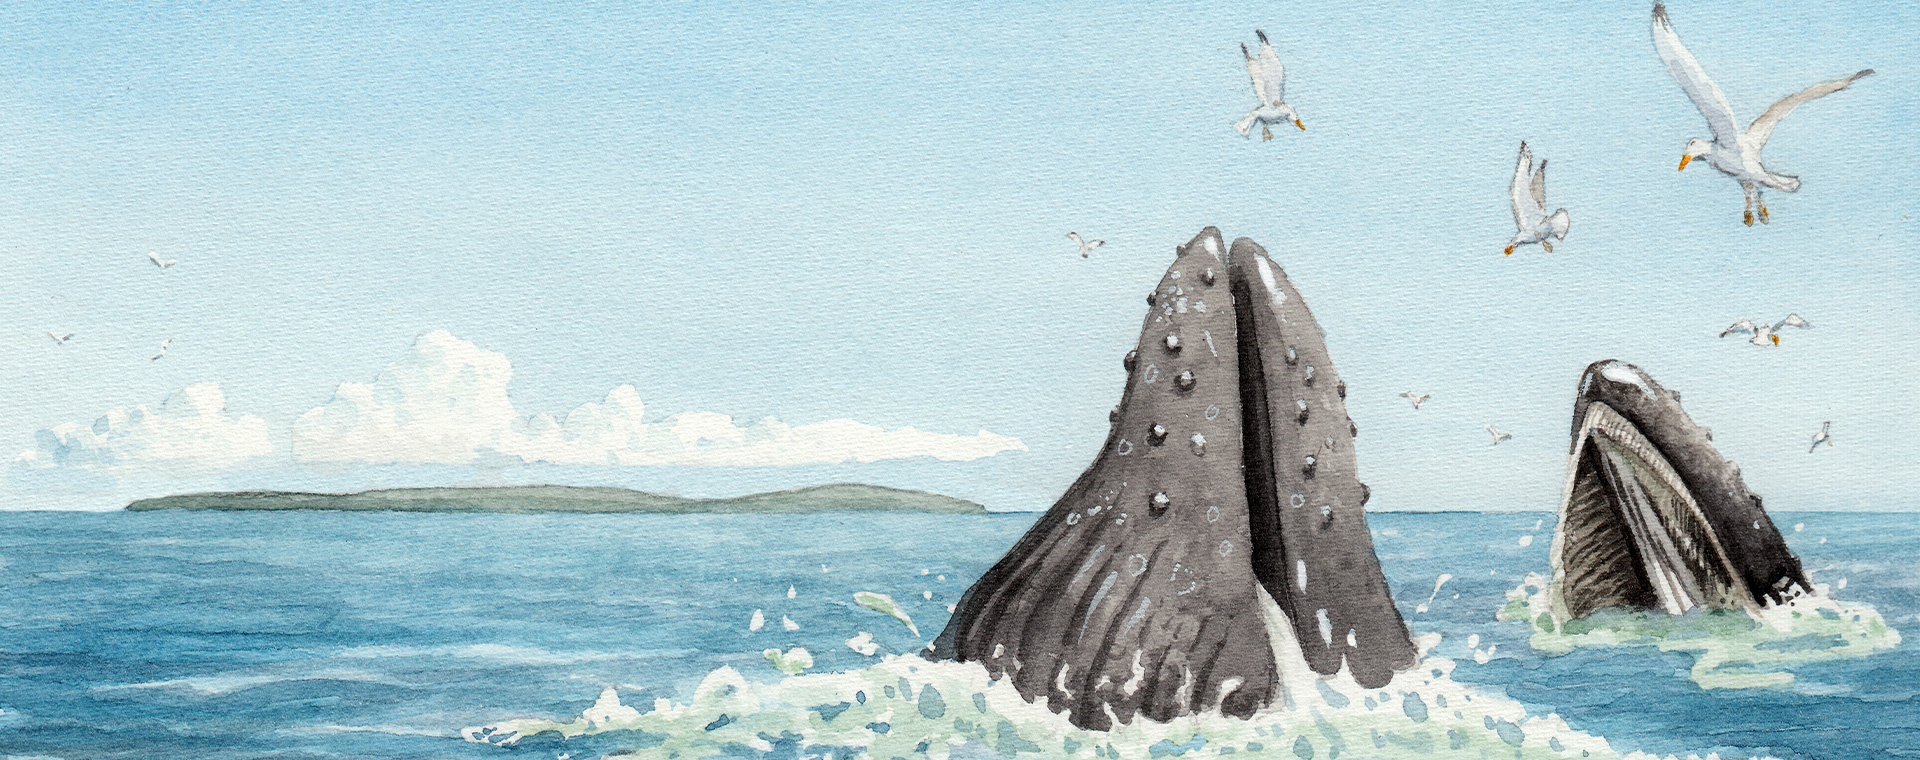 Watercolour illustration in muted shades of blue, black and white. The mouths of two lunge feeding humpback whales emerge from the sea attracting a flock of seagulls.